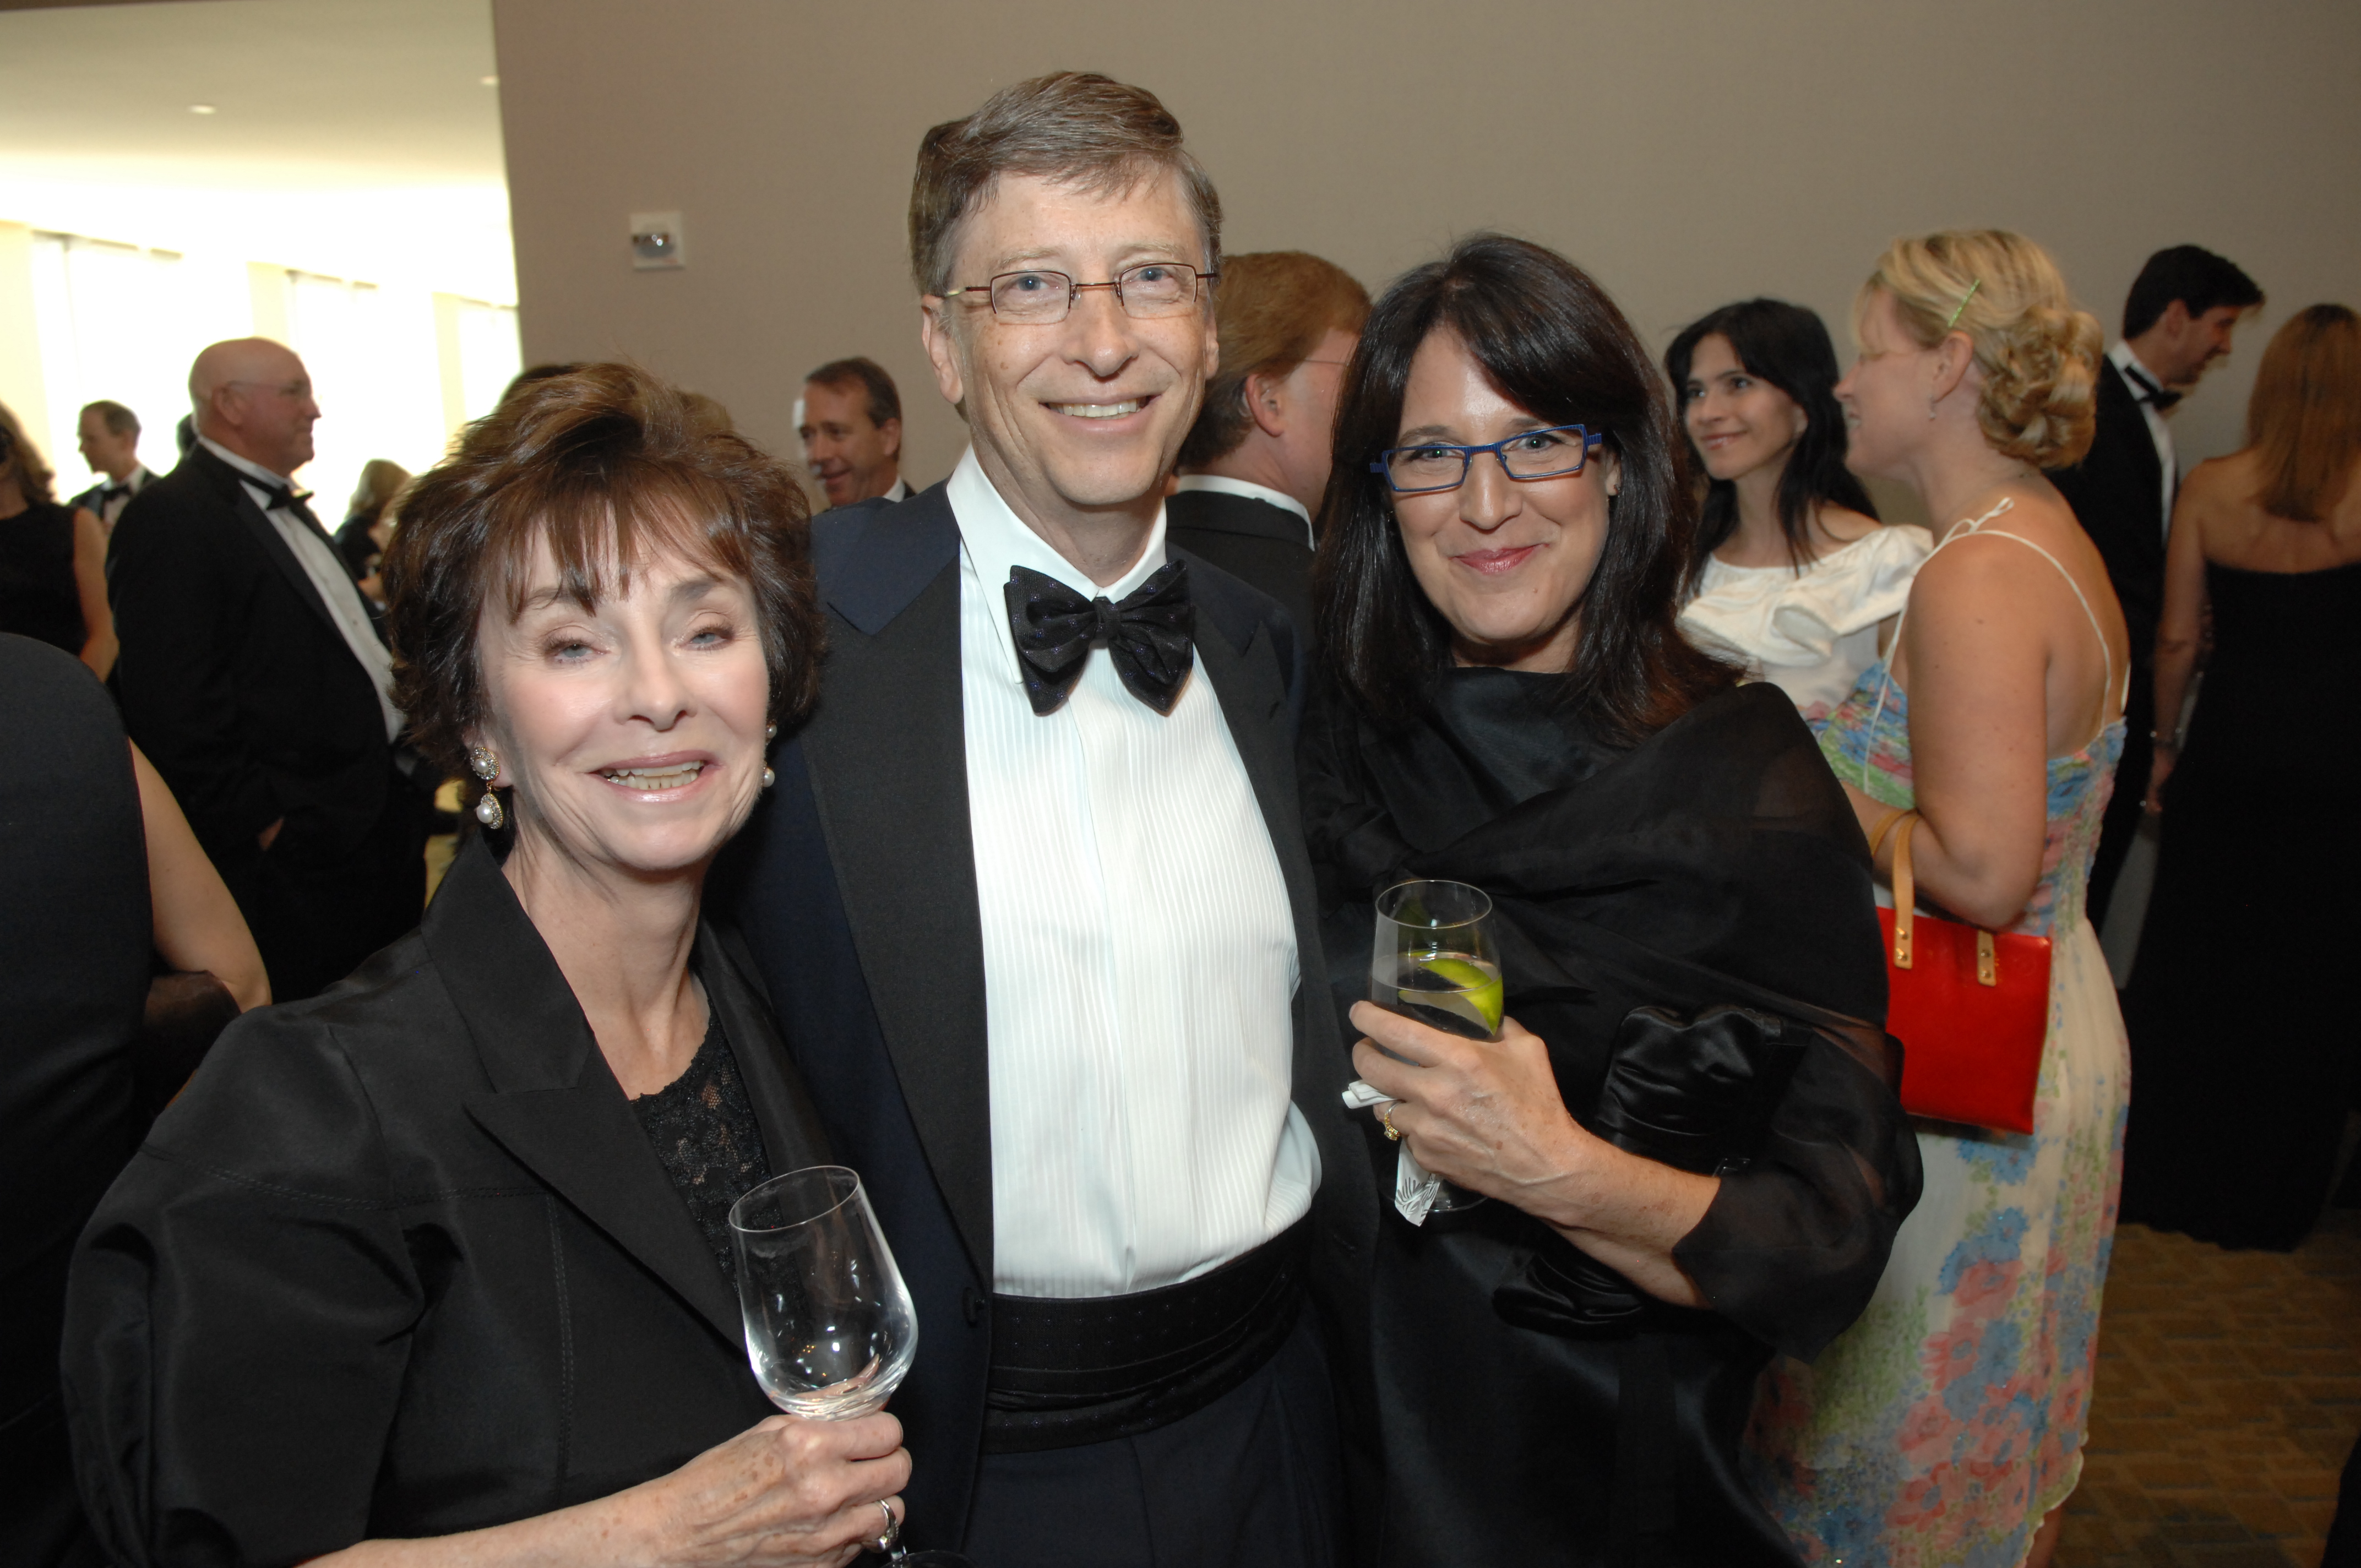 WE founders Melissa Waggener Zorkin and Pam Edstrom with Bill Gates